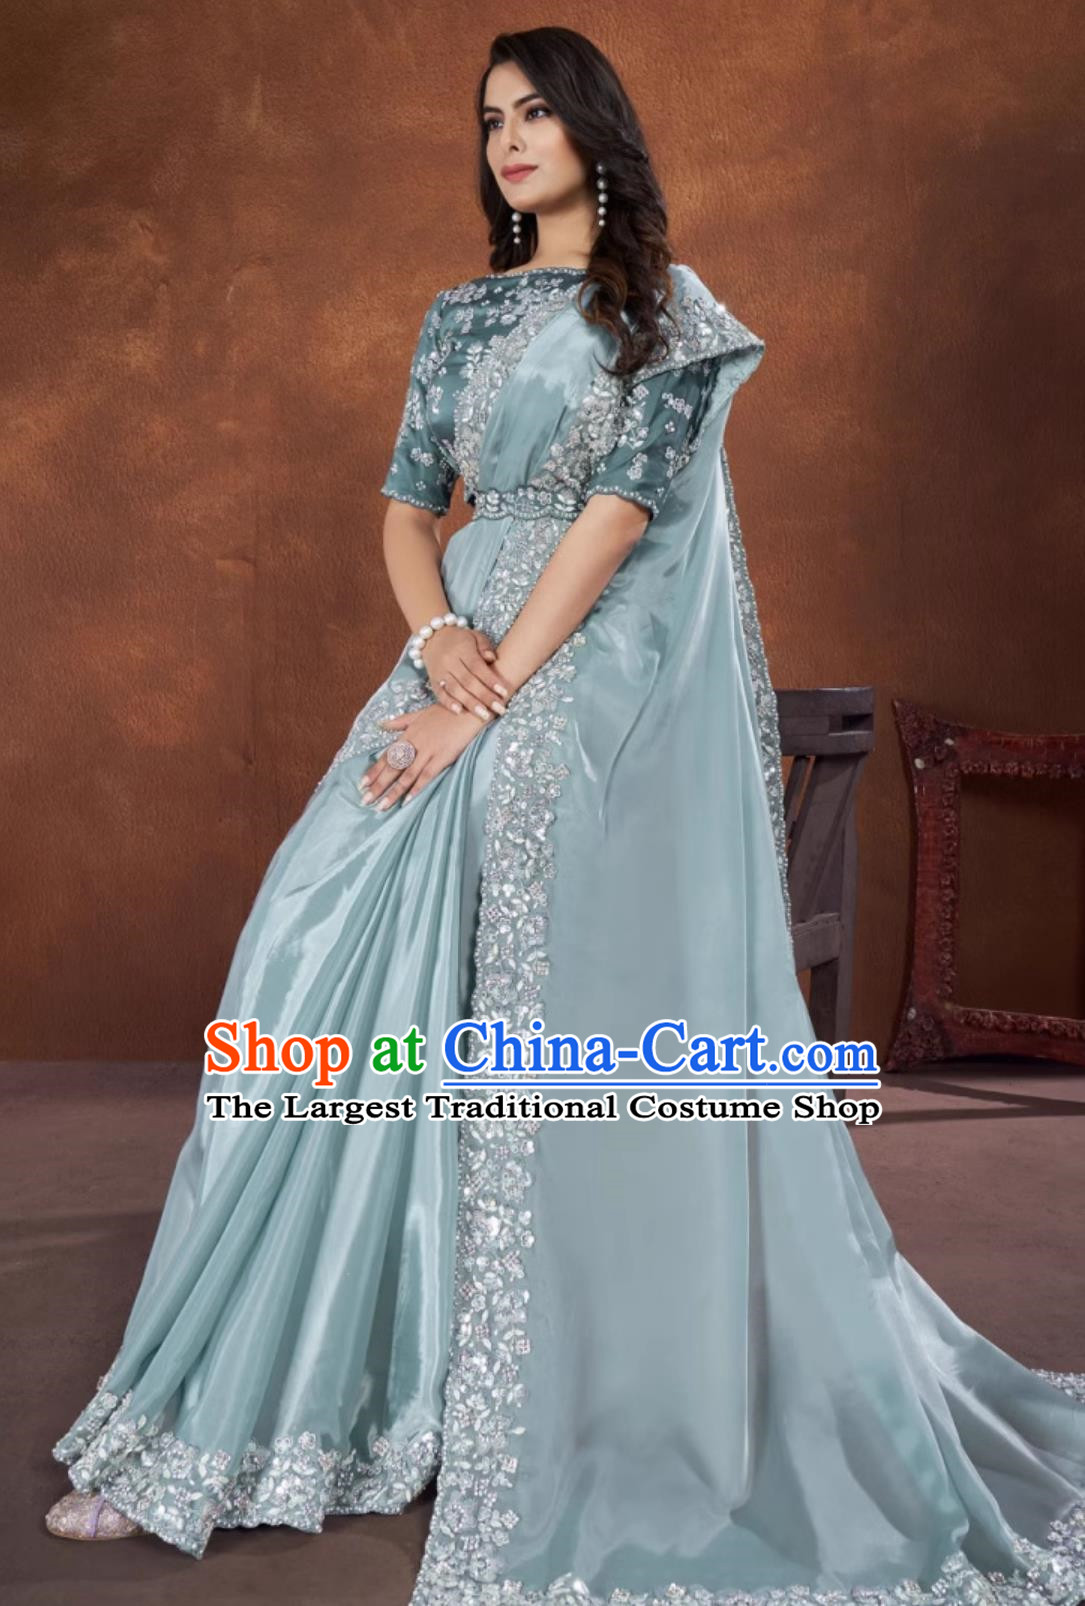 India Embroidery Light Blue Dress Festival Sari National Costume Indian Traditional Women Clothing